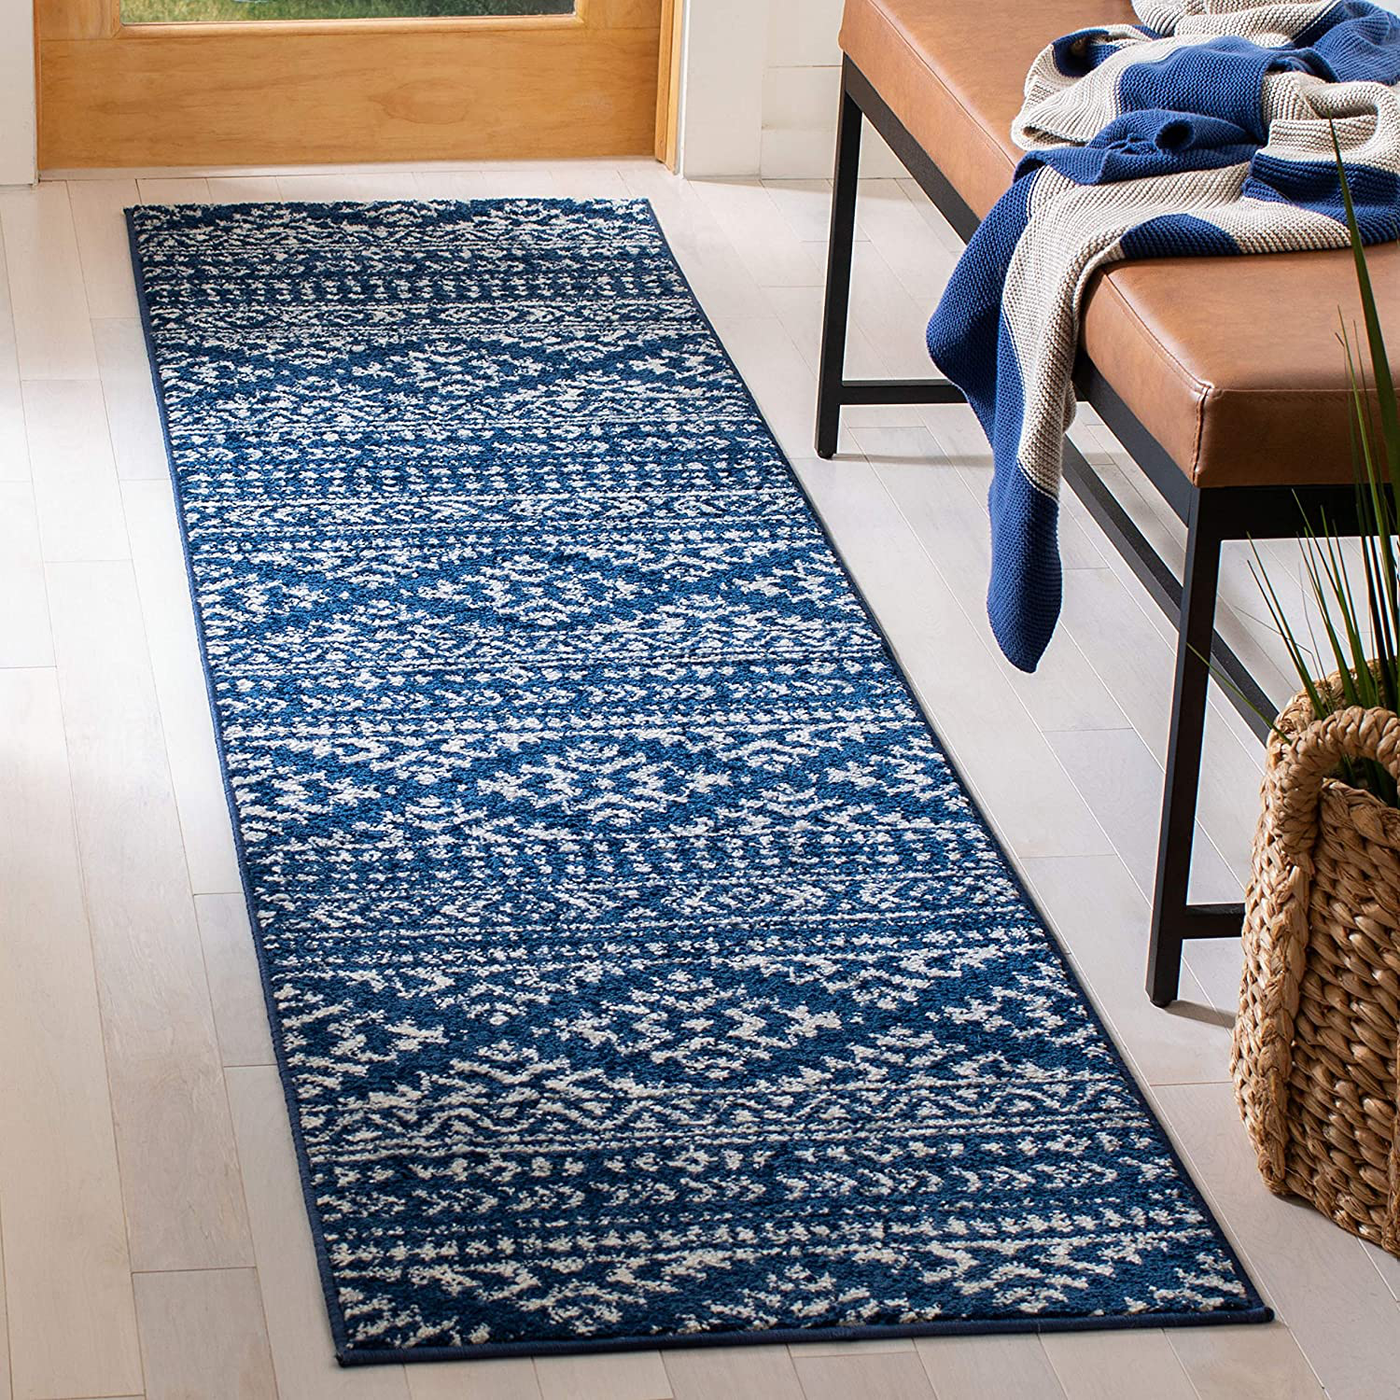 Safavieh Tulum Collection TUL272N Moroccan Boho Tribal Non-Shedding Stain Resistant Living Room Bedroom Runner, 2' x 21' , Navy / Ivory